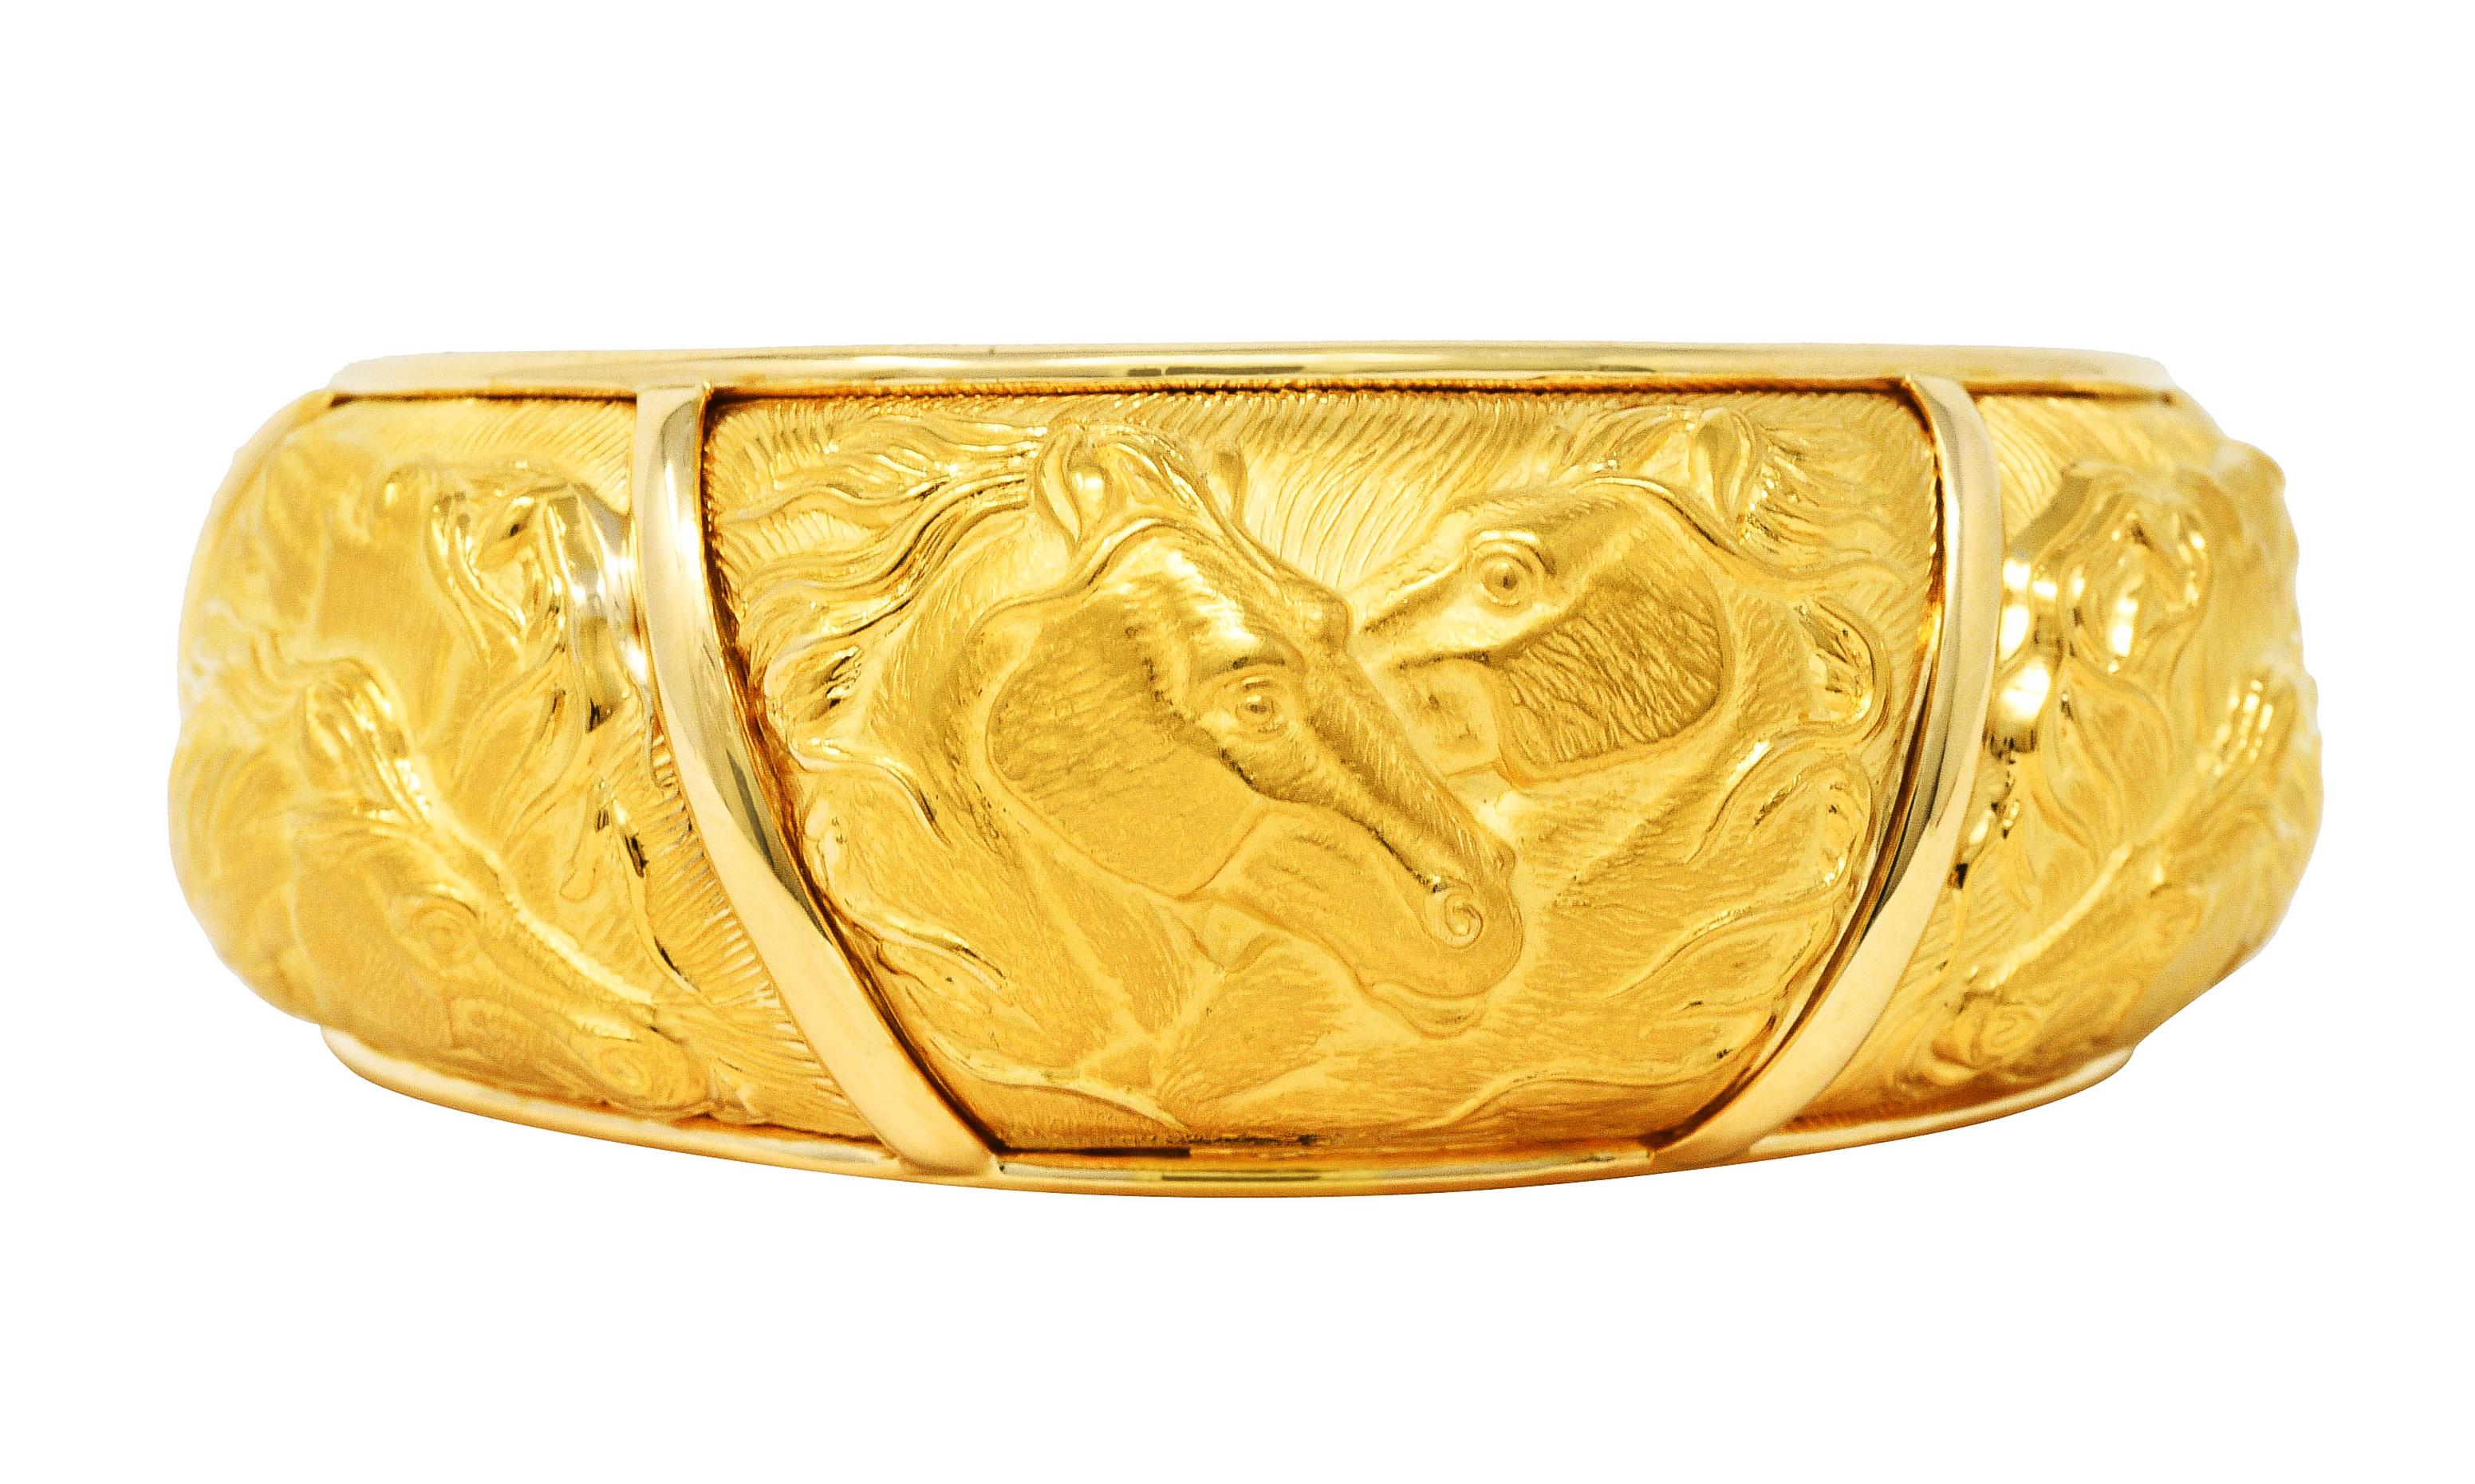 Cuff bracelet features five repoussè style panels depicting highly rendered matte gold horses

Background is highly texturized while panels are separated by polished gold bands

Stamped 750 for 18 karat gold

With maker's mark and serial number for